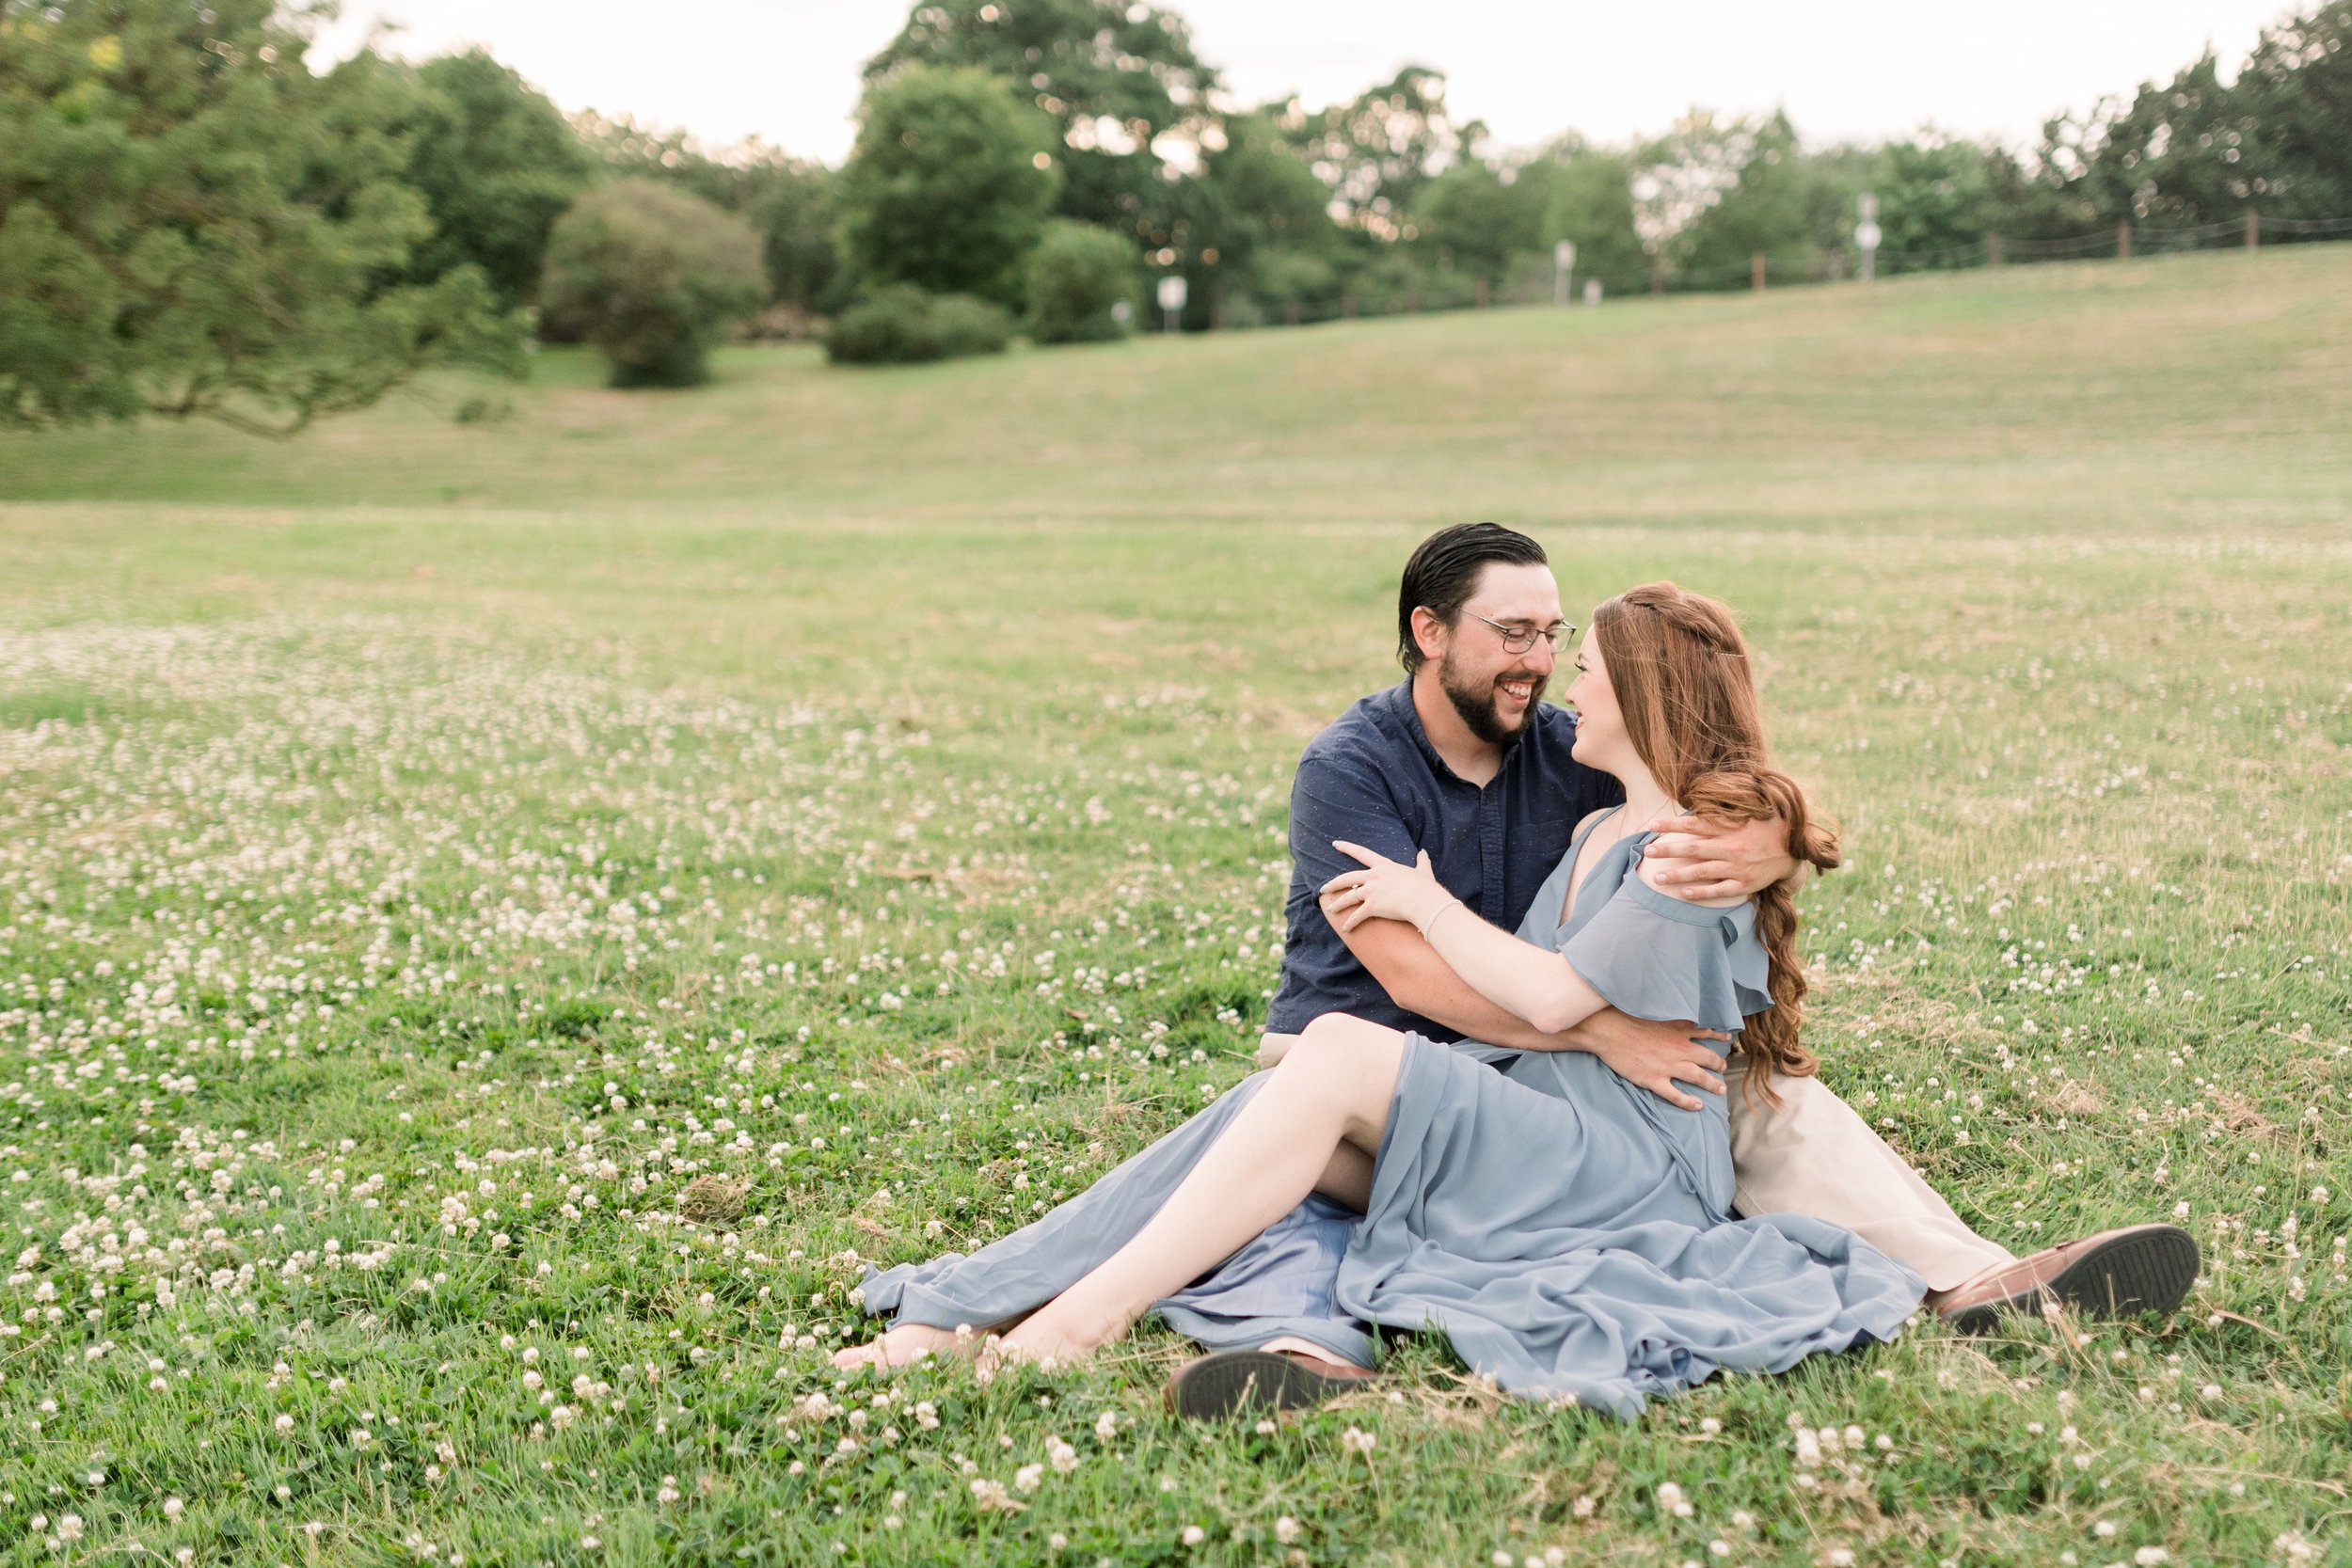  In a green field with white flowers, an engaged couple sits together by Chelsea Mason Photography. dreamy engagement portraits #chelseamasonphotography #chelseamasonengagements #Ottawaengagements #DominonArboretum #Ottawaphotographers&nbsp; 